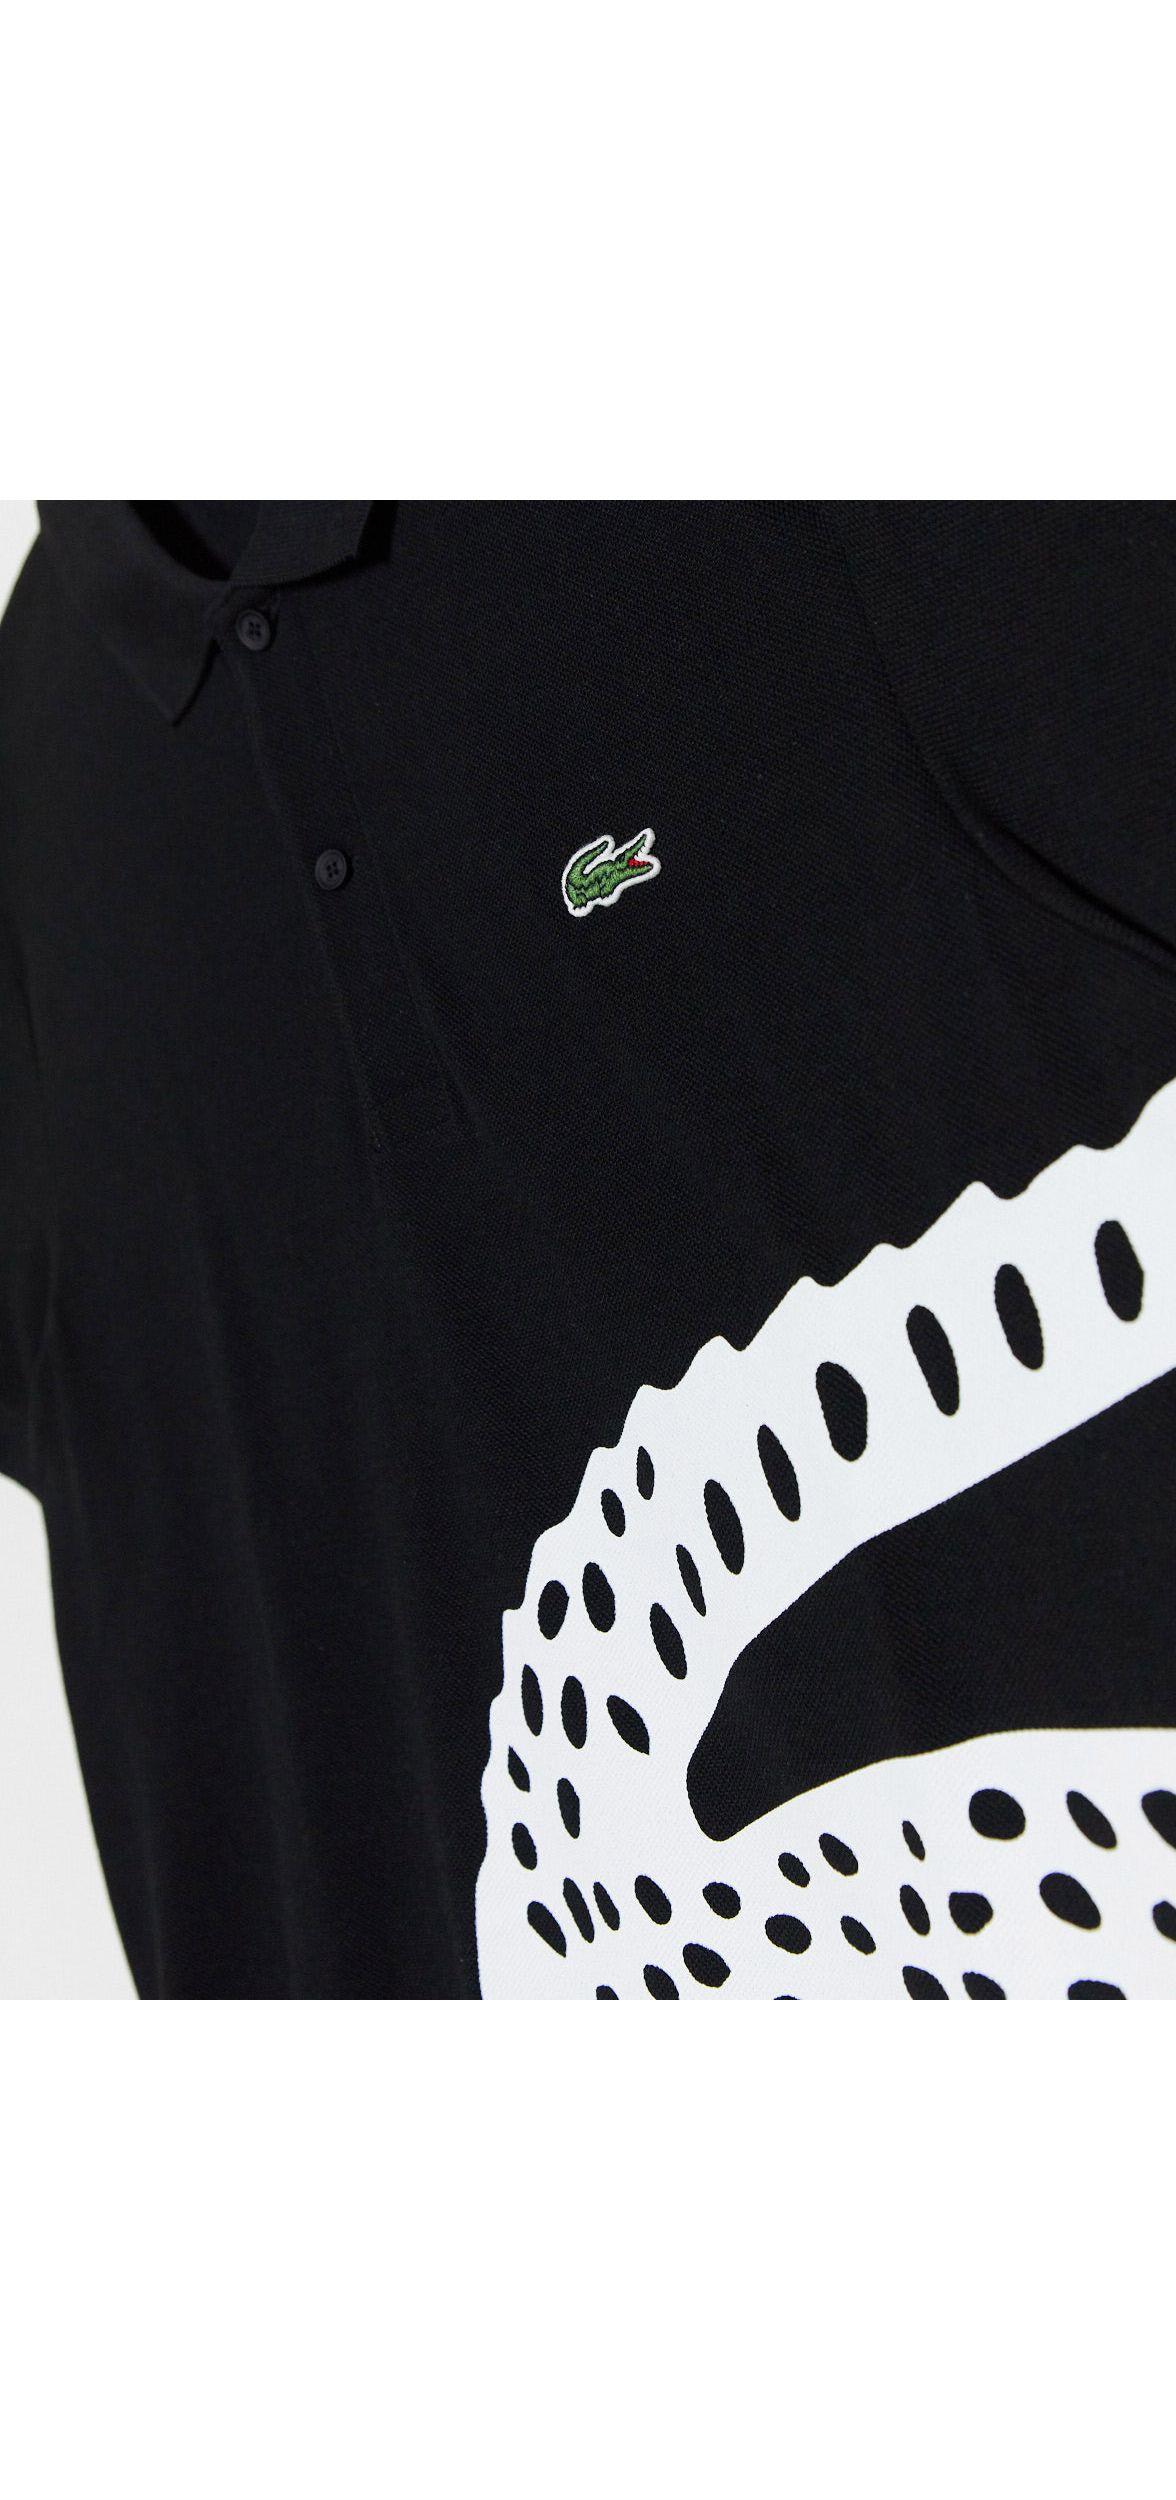 Lacoste Mens 2020 PH5101 Ribbed 2 Button Embroidered Crocodile Polo Shirt 